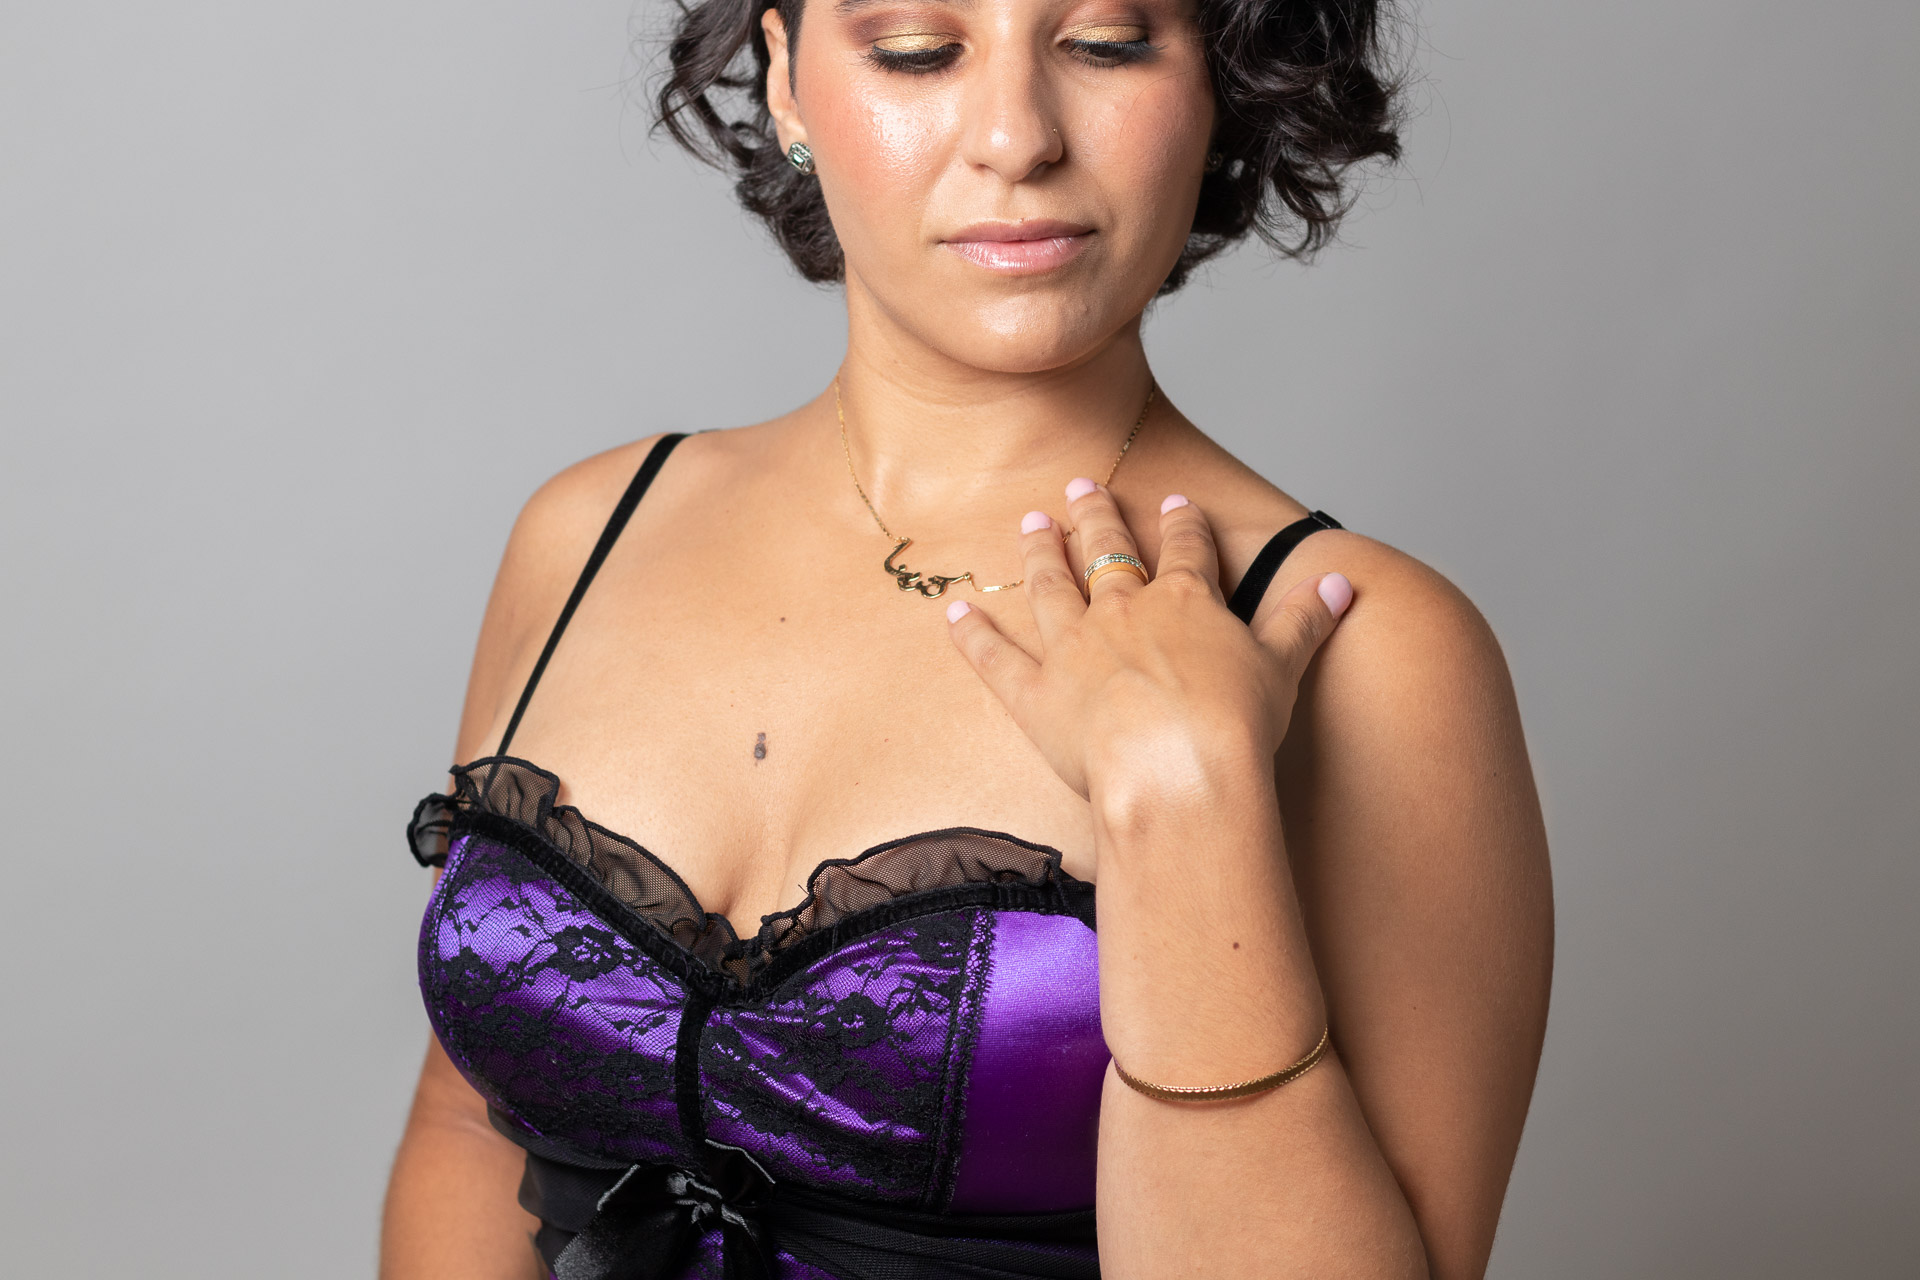 Black-haired woman in a purple bustier looking down